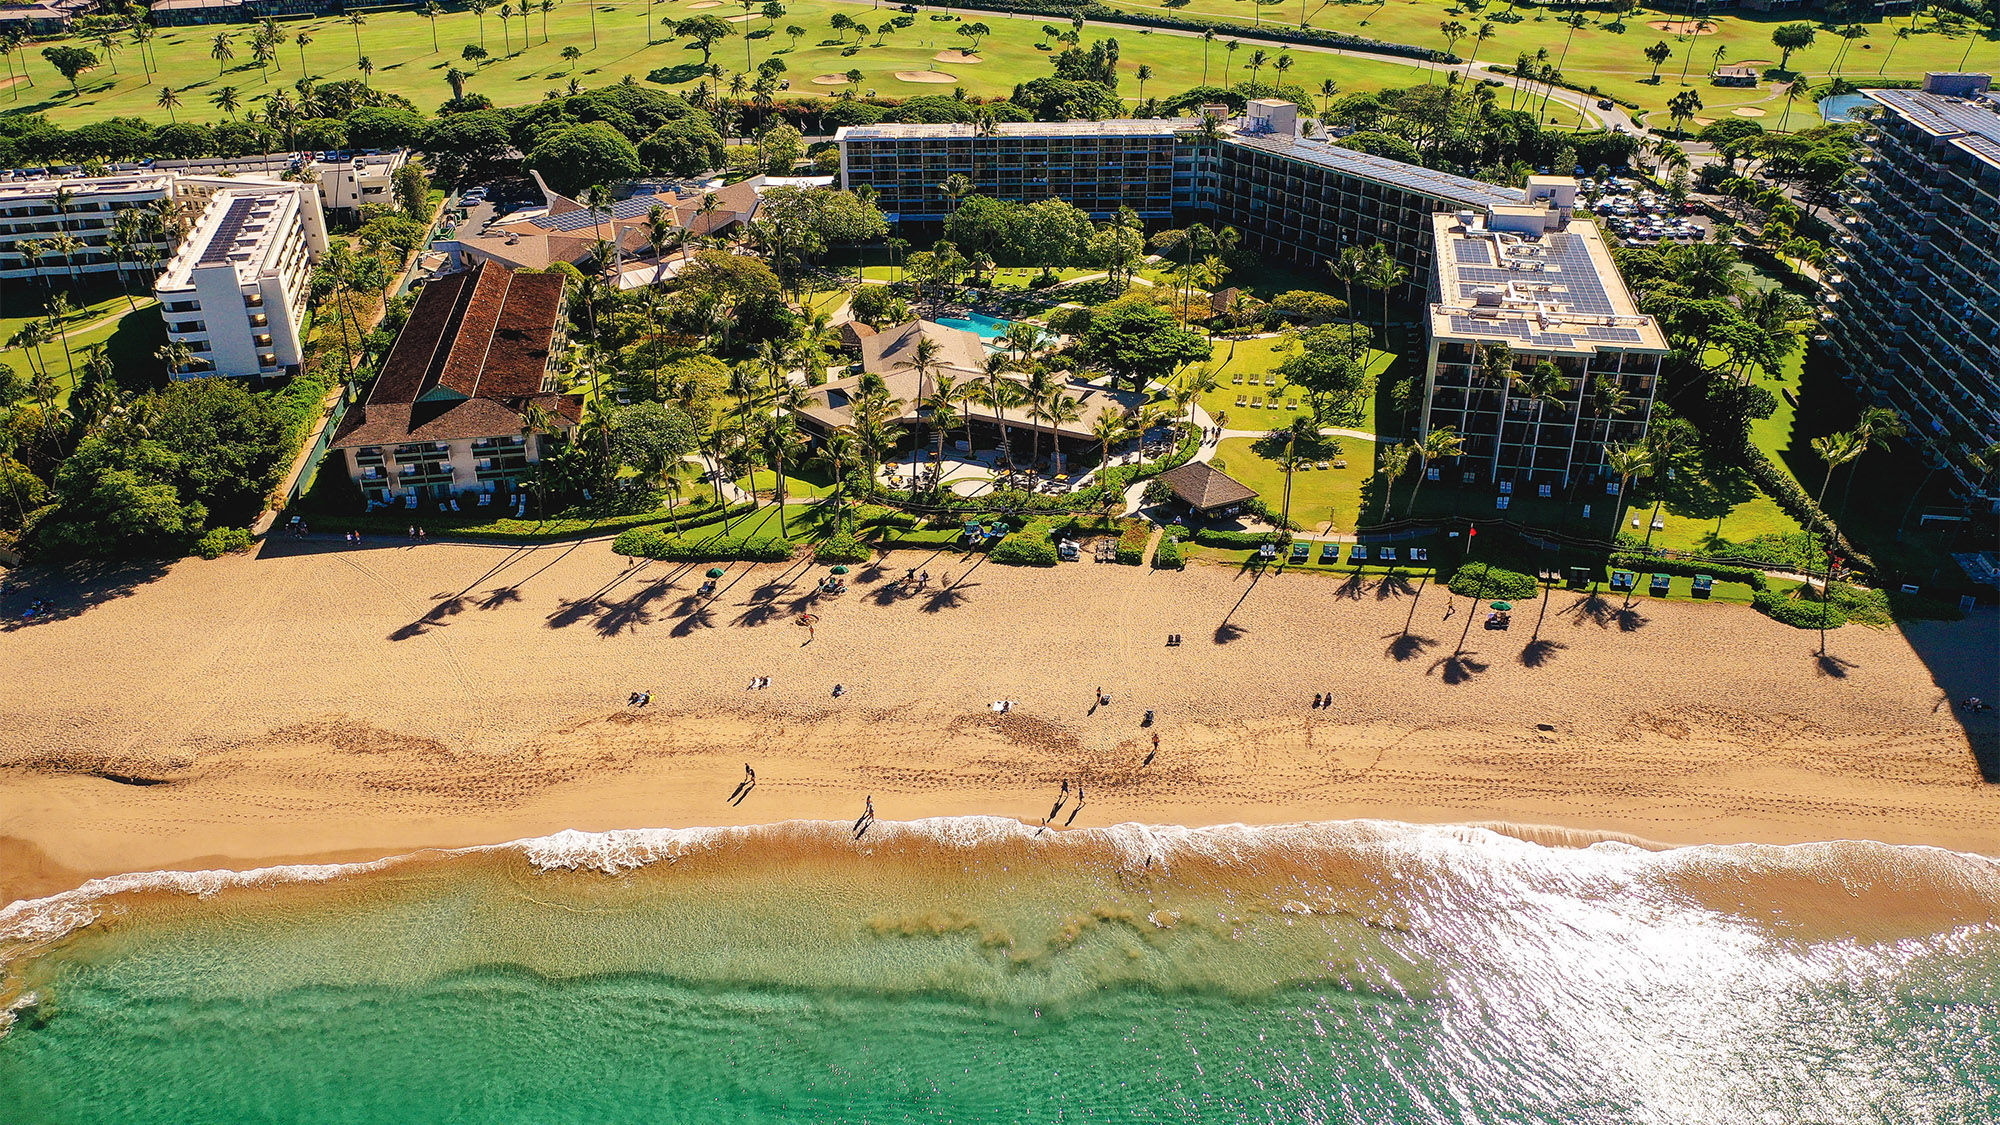 The Kaanapali Beach Hotel, which offers advisors a complimentary night for every 10 nights booked.